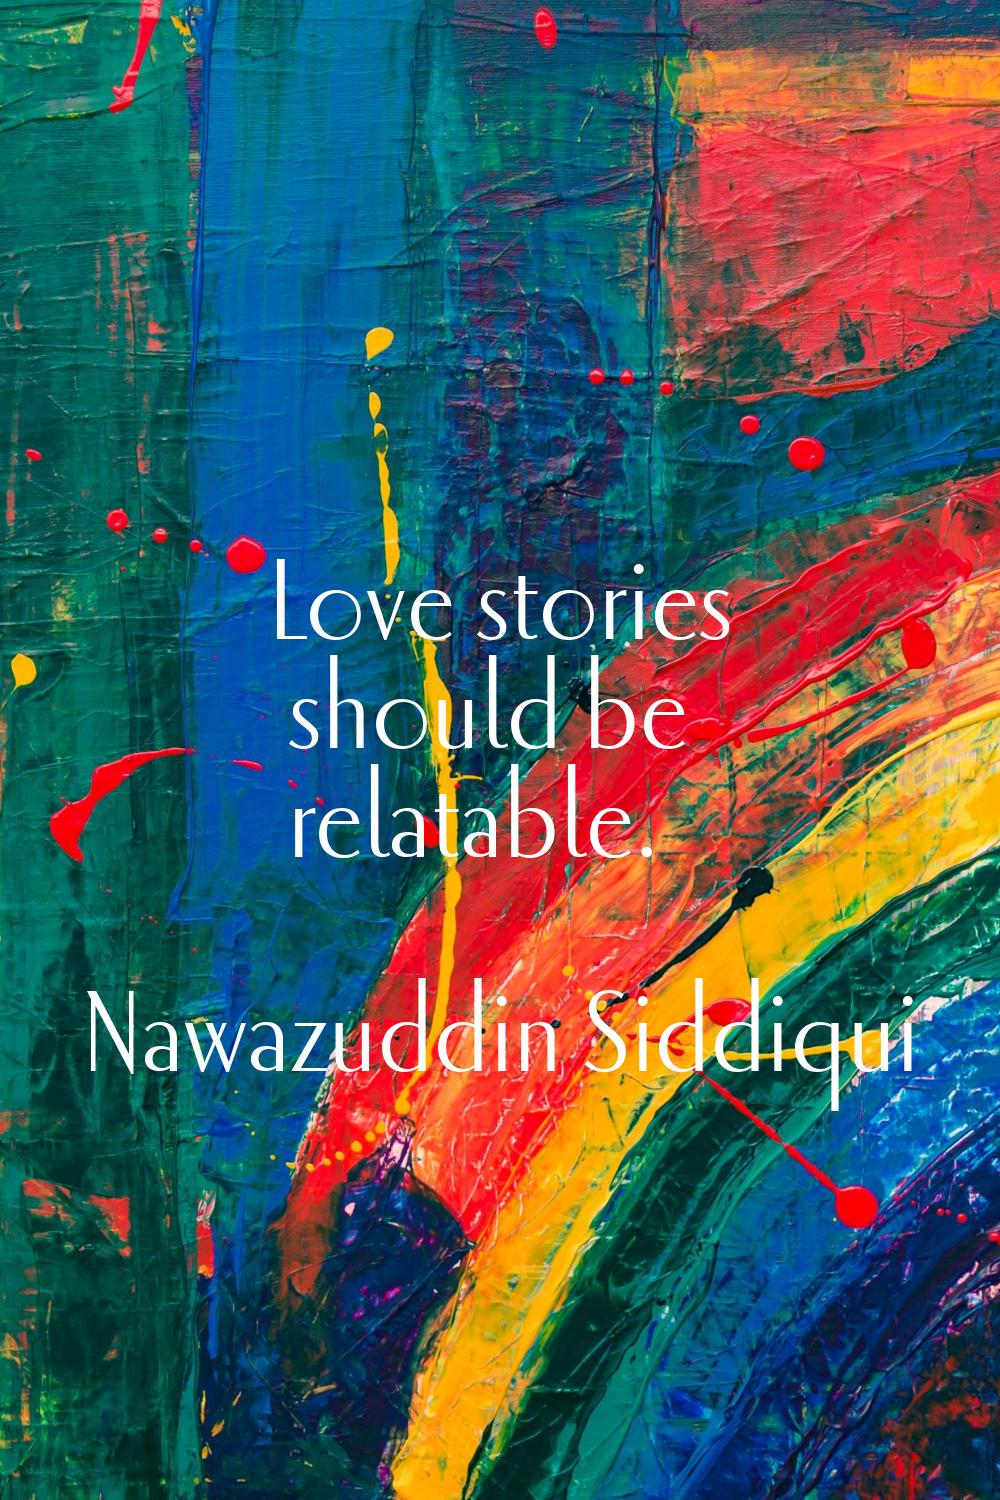 Love stories should be relatable.